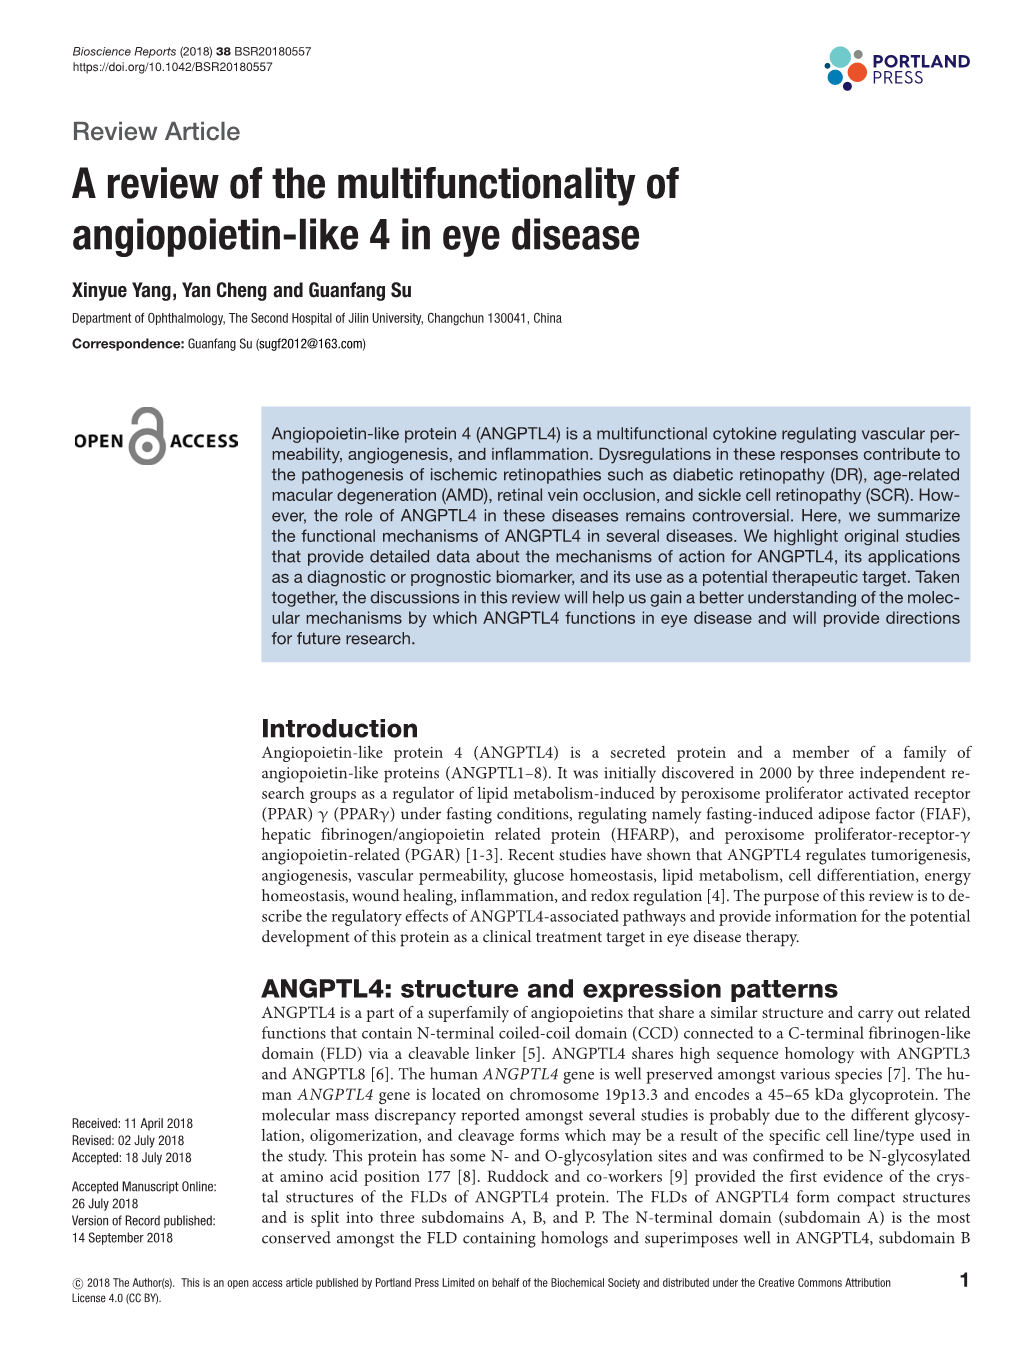 A Review of the Multifunctionality of Angiopoietin-Like 4 in Eye Disease